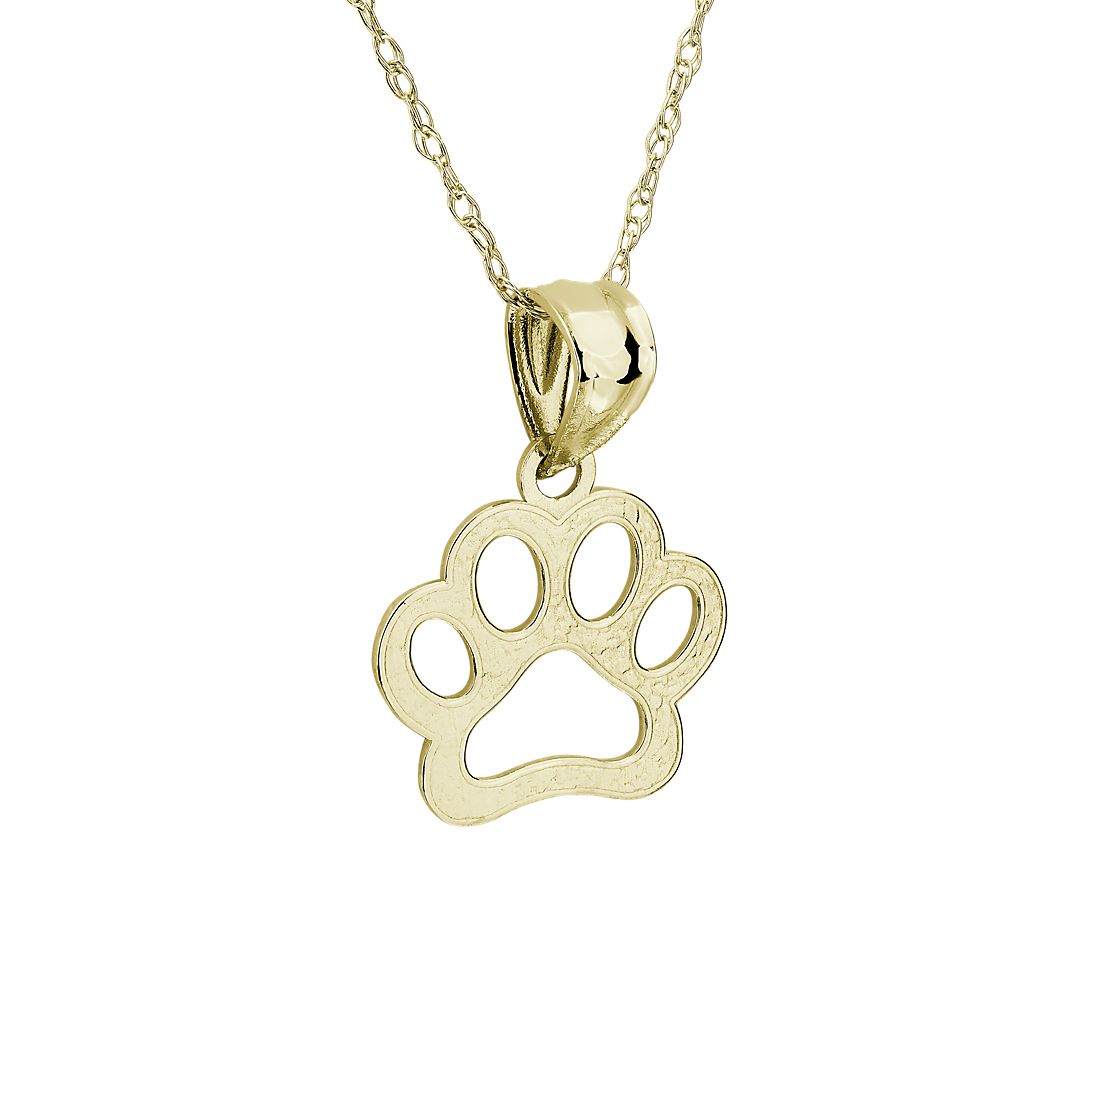 14k yellow gold paw print charm on a gold chain